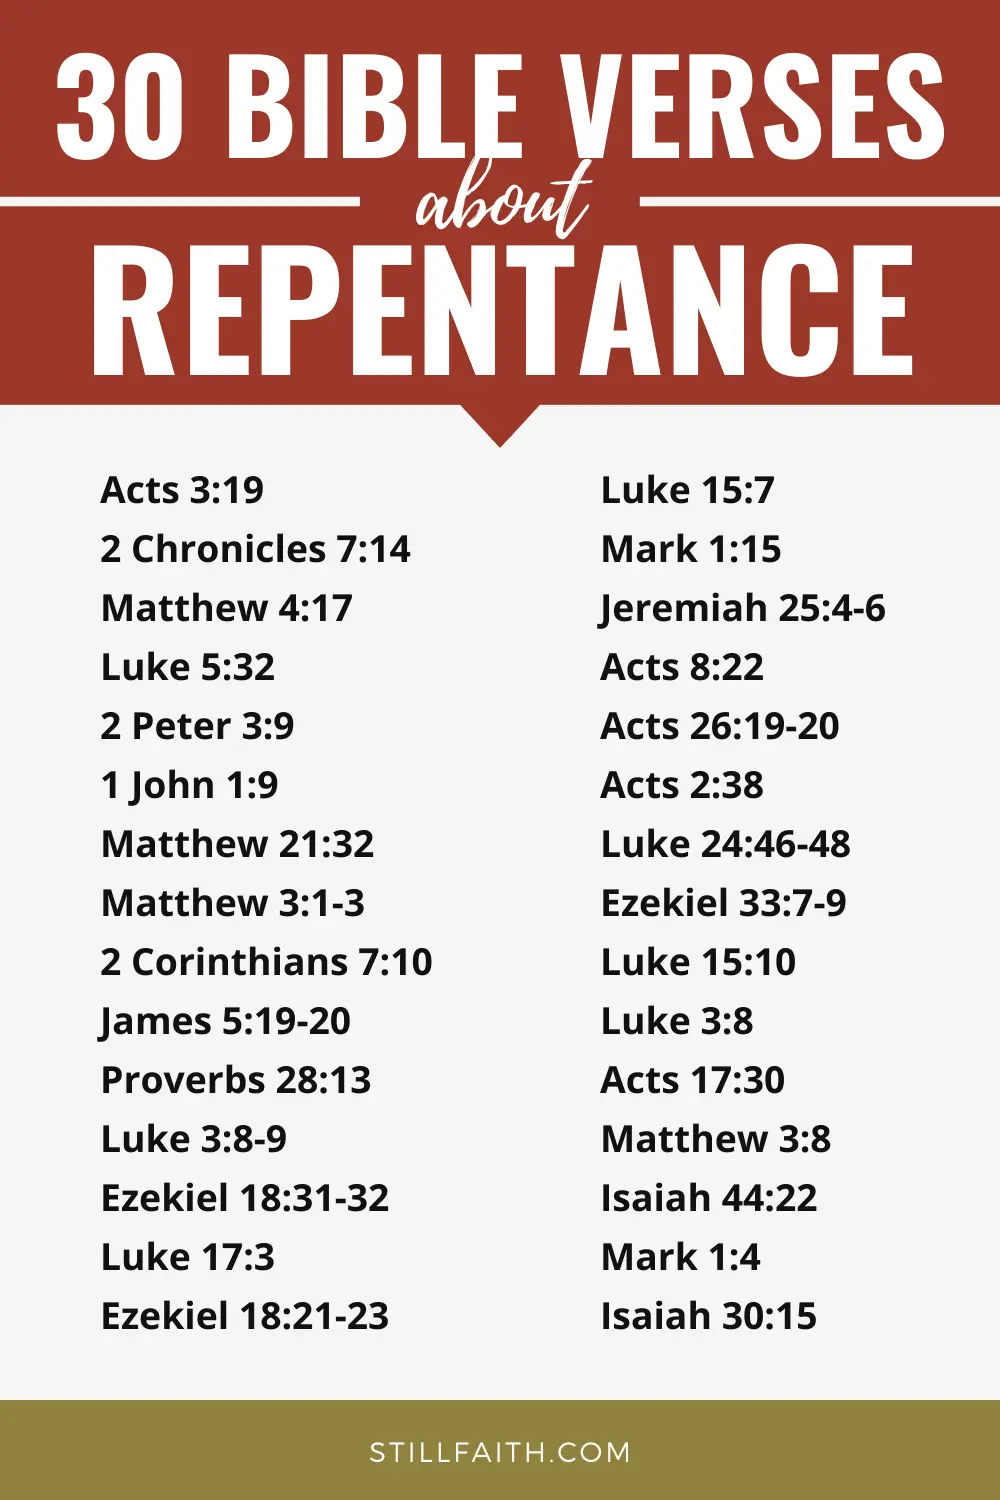 Bible Verses about Repentance